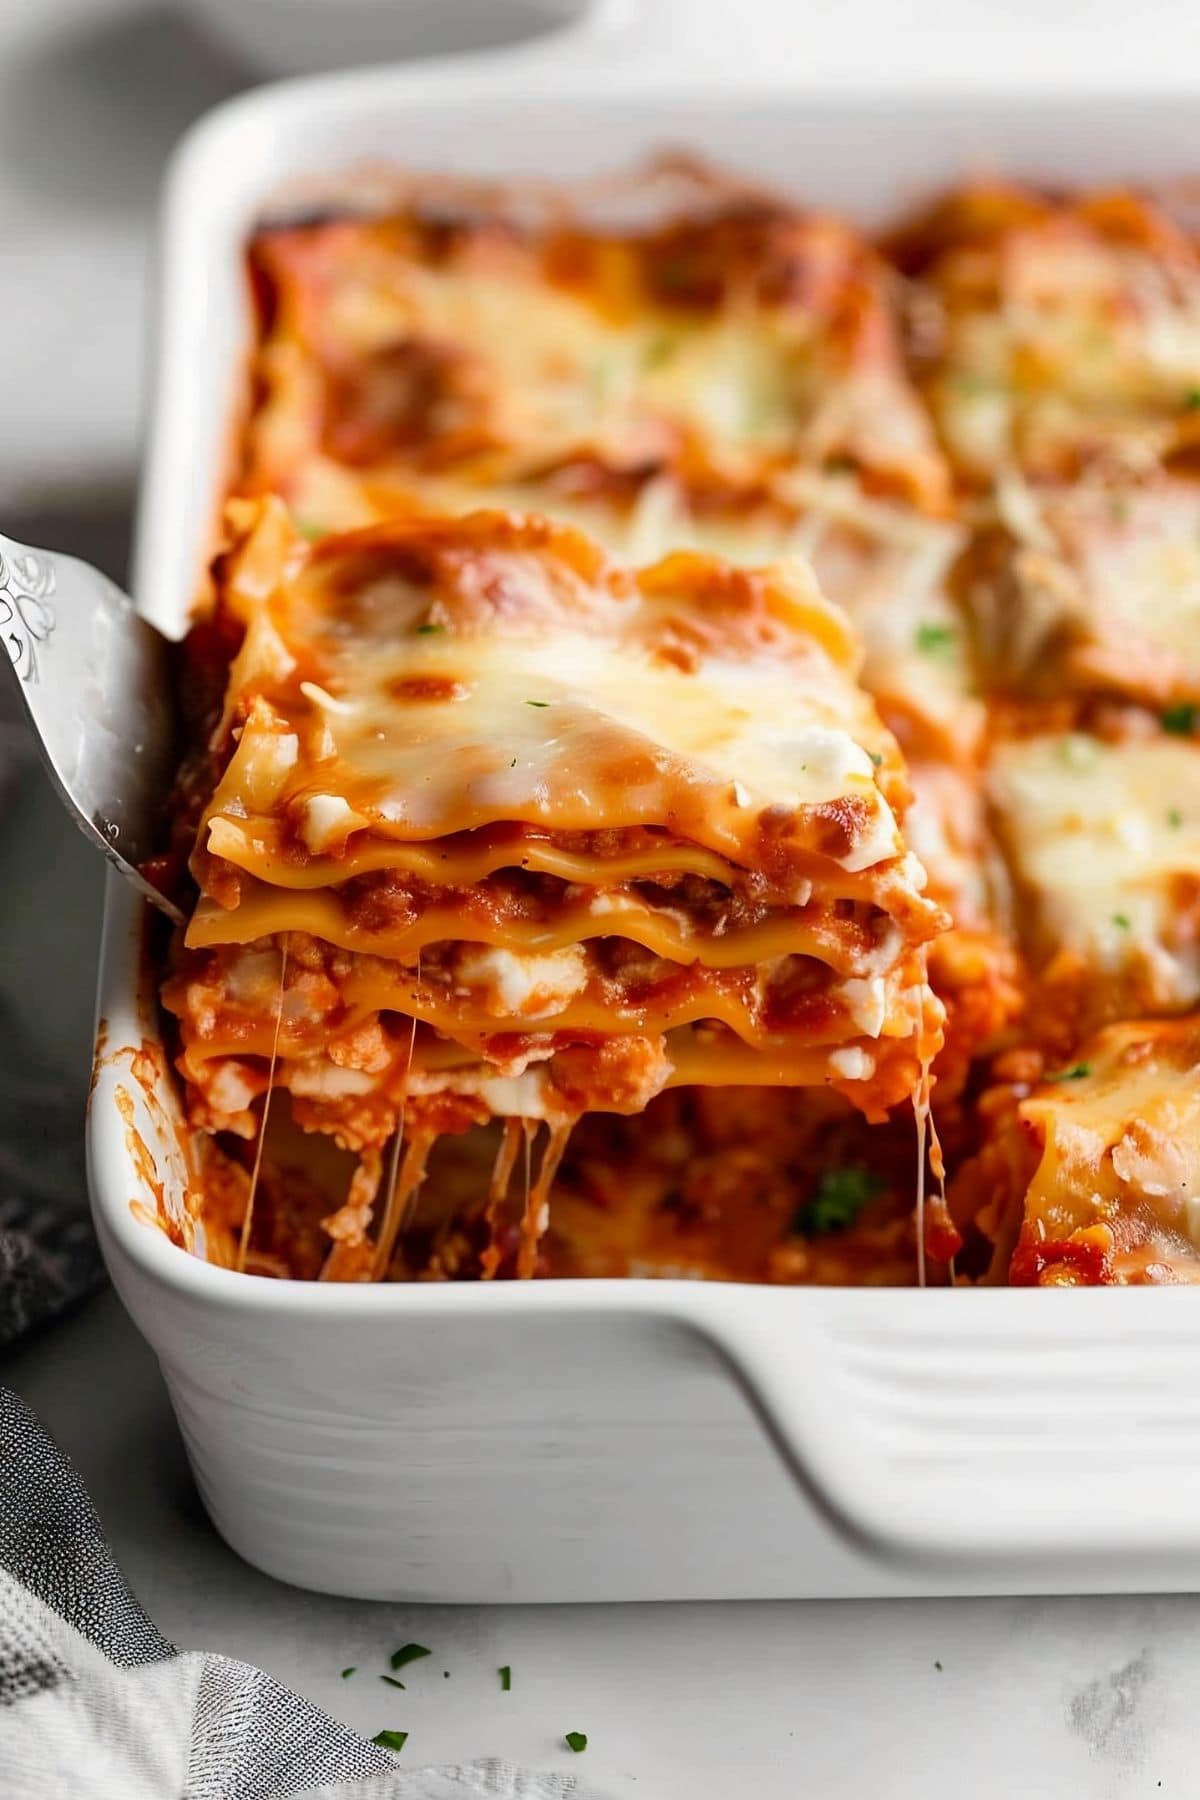 Spatula Pulling a Slice of Cheesy, Saucy Cottage Cheese Lasagna out of a Casserole Dish of Lasagna